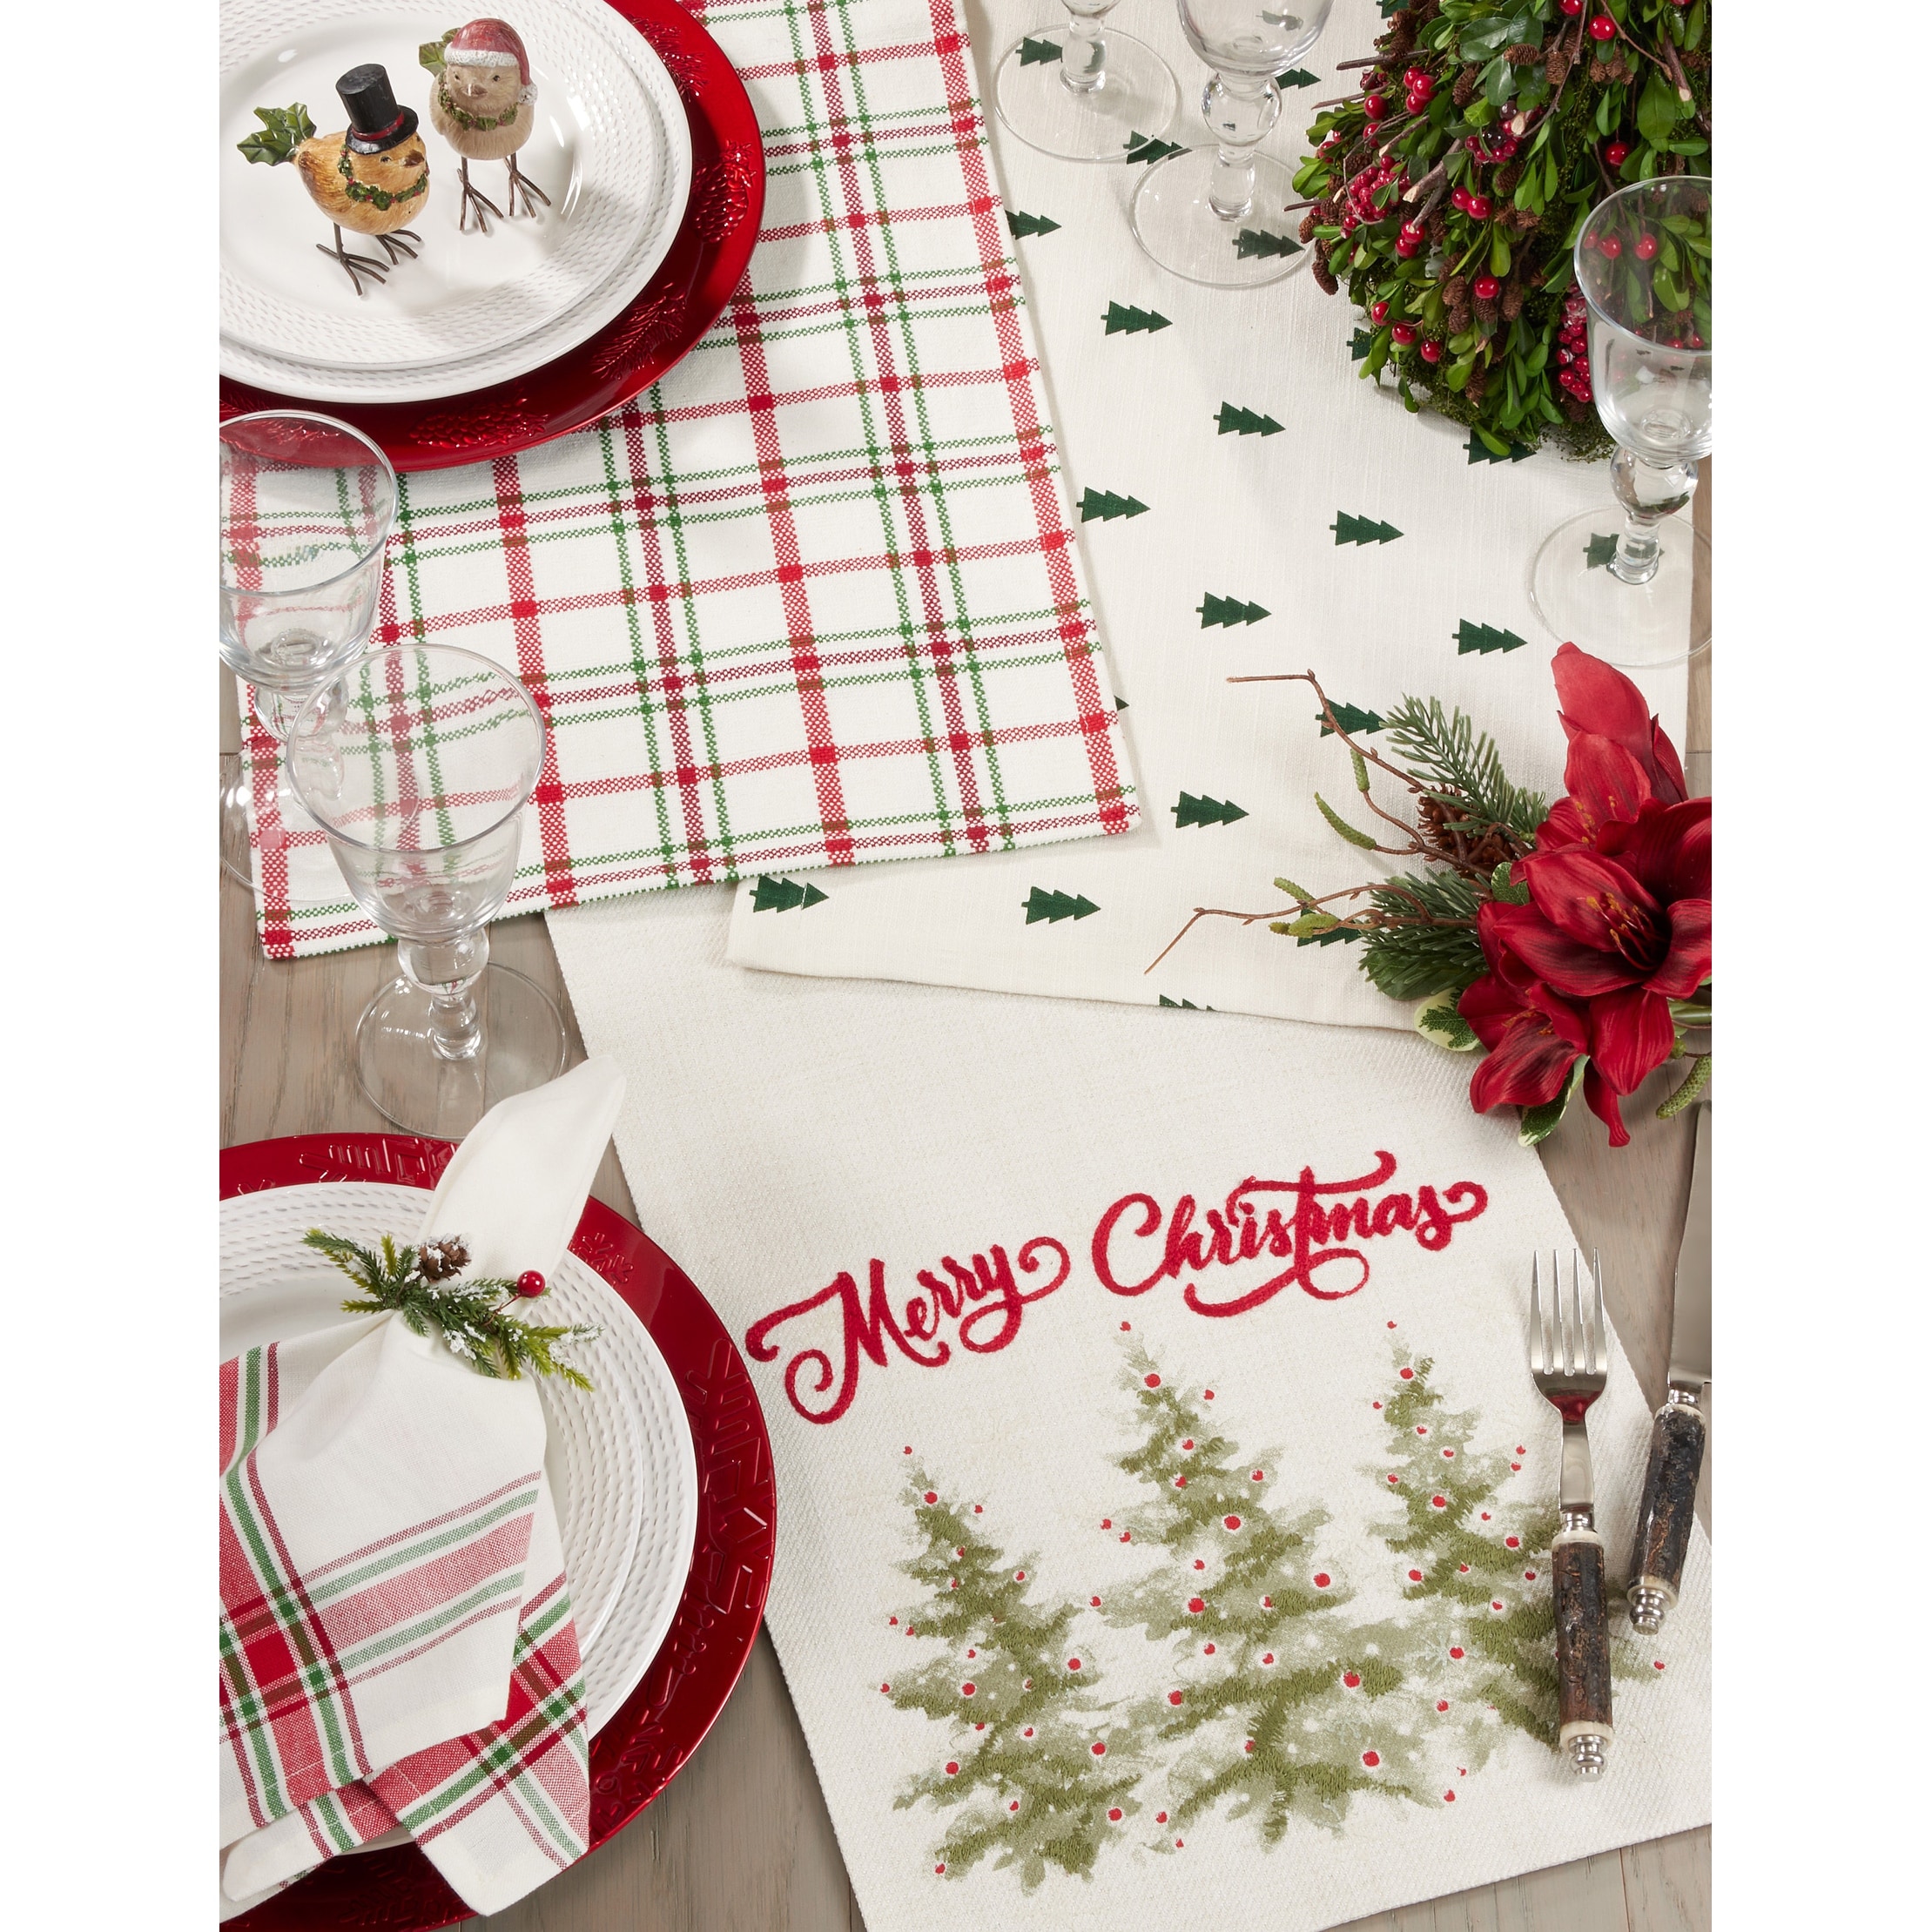 https://ak1.ostkcdn.com/images/products/is/images/direct/acf3e04640b2165d02d3b7a7cb921736f8c76727/Table-Napkins-With-Plaid-Design-%28Set-of-4%29.jpg